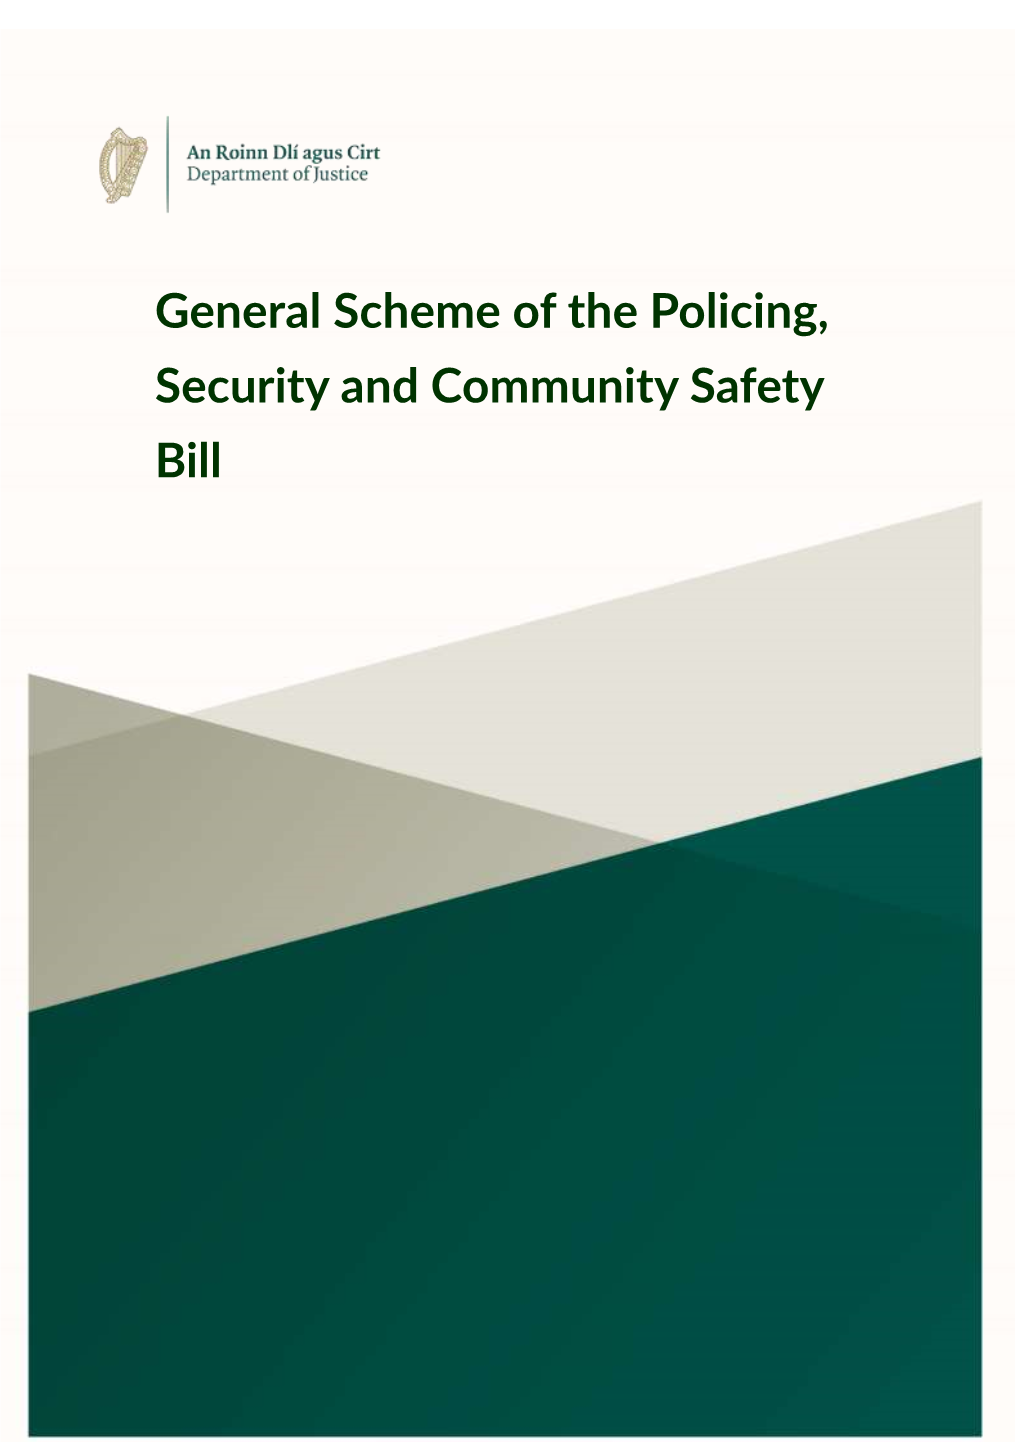 General Scheme of the Policing Security and Community Safety Bill